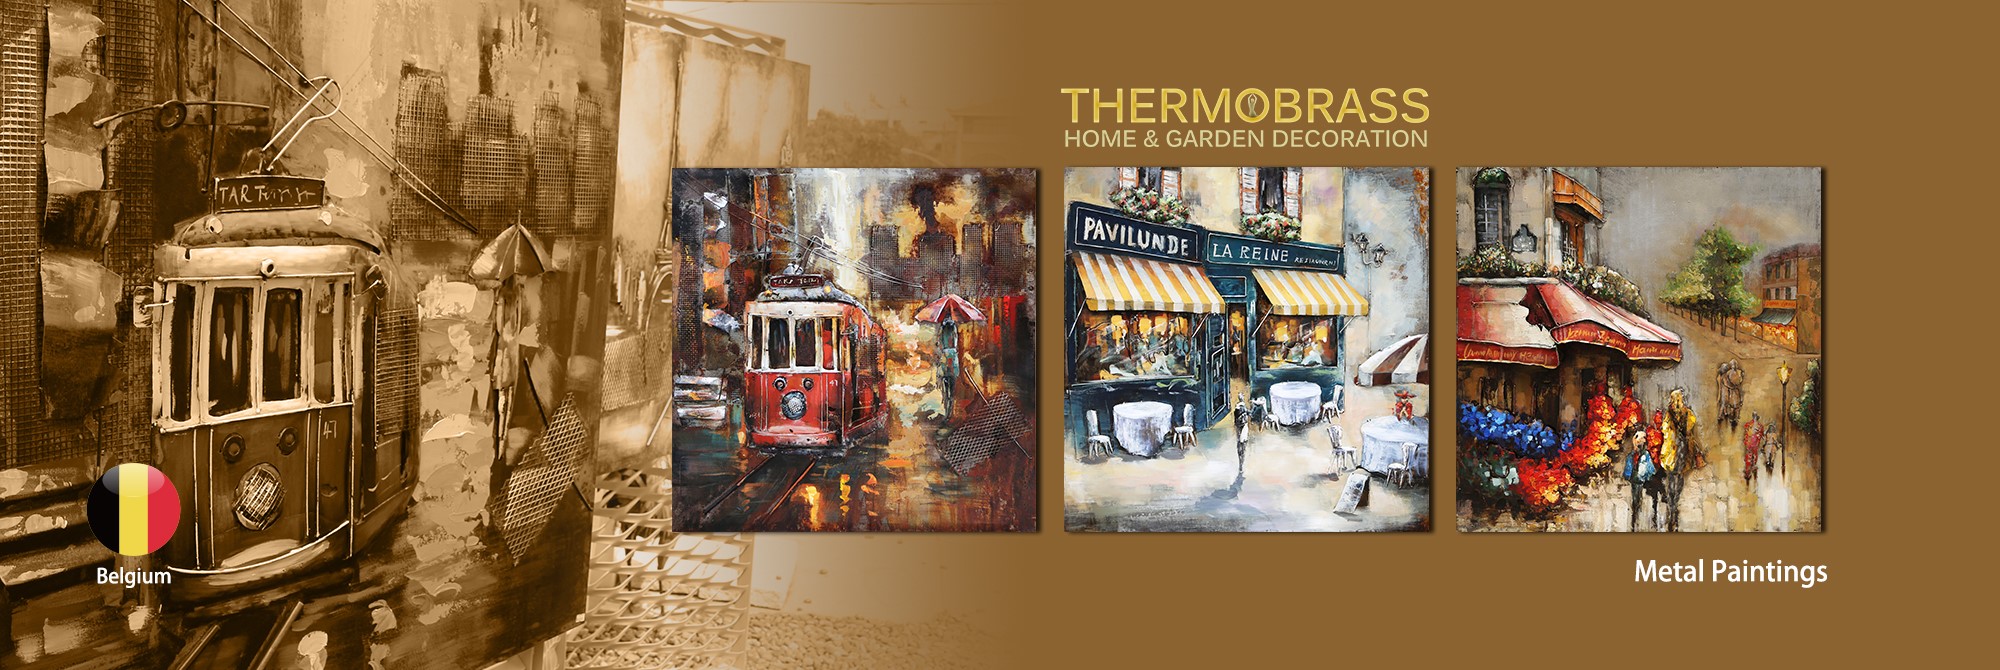 Thermobrass metal paintings